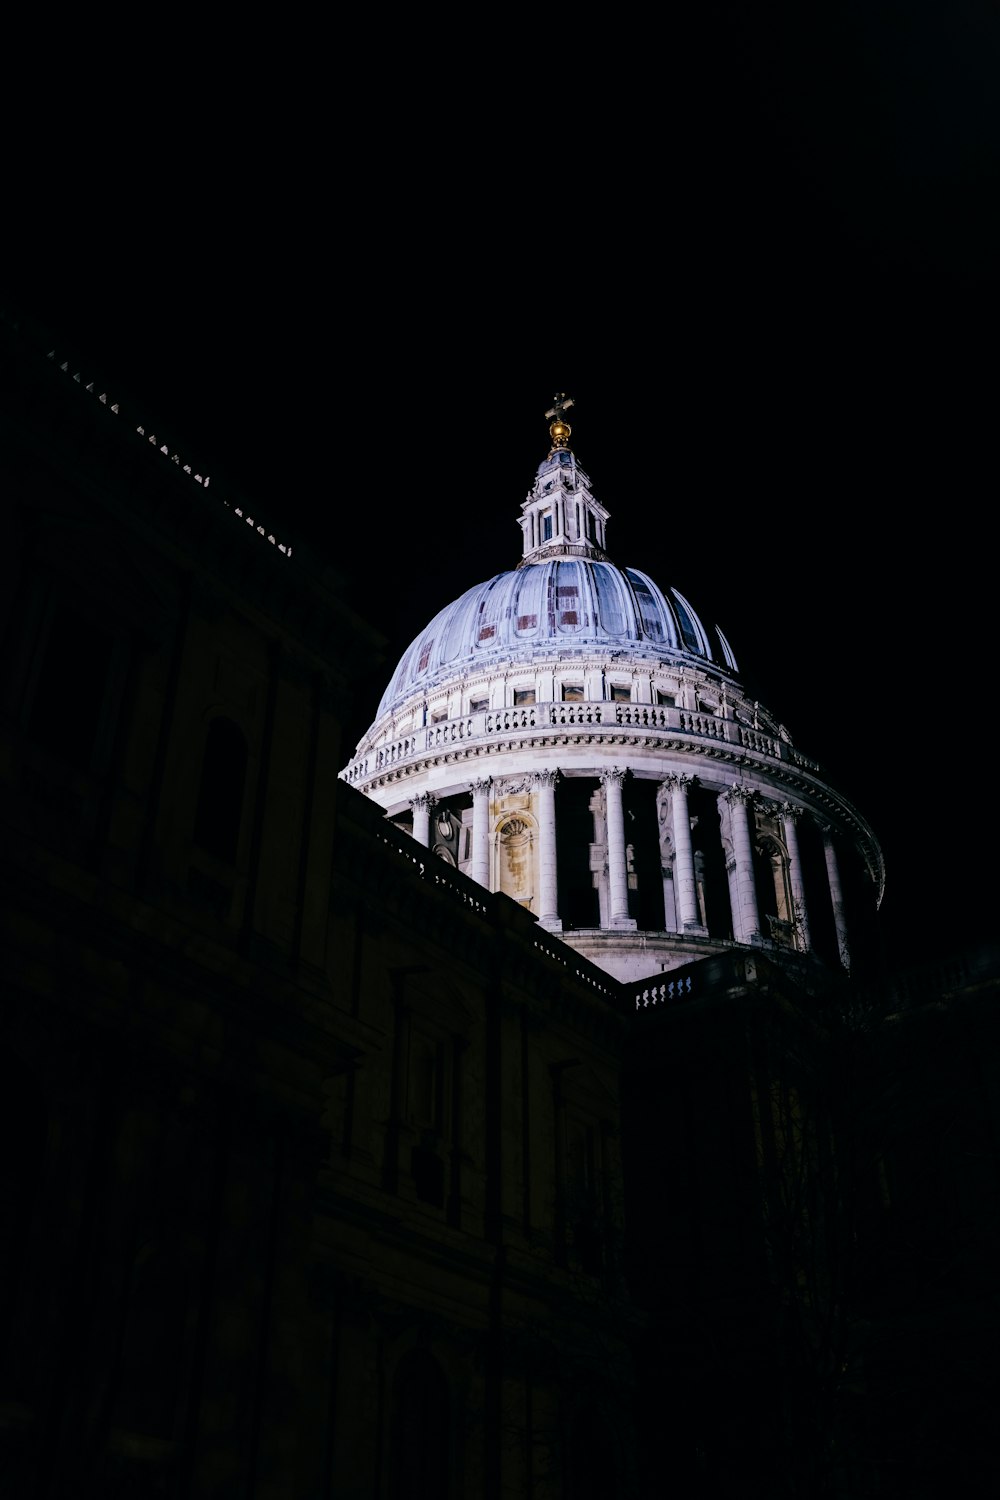 the dome of a building lit up at night